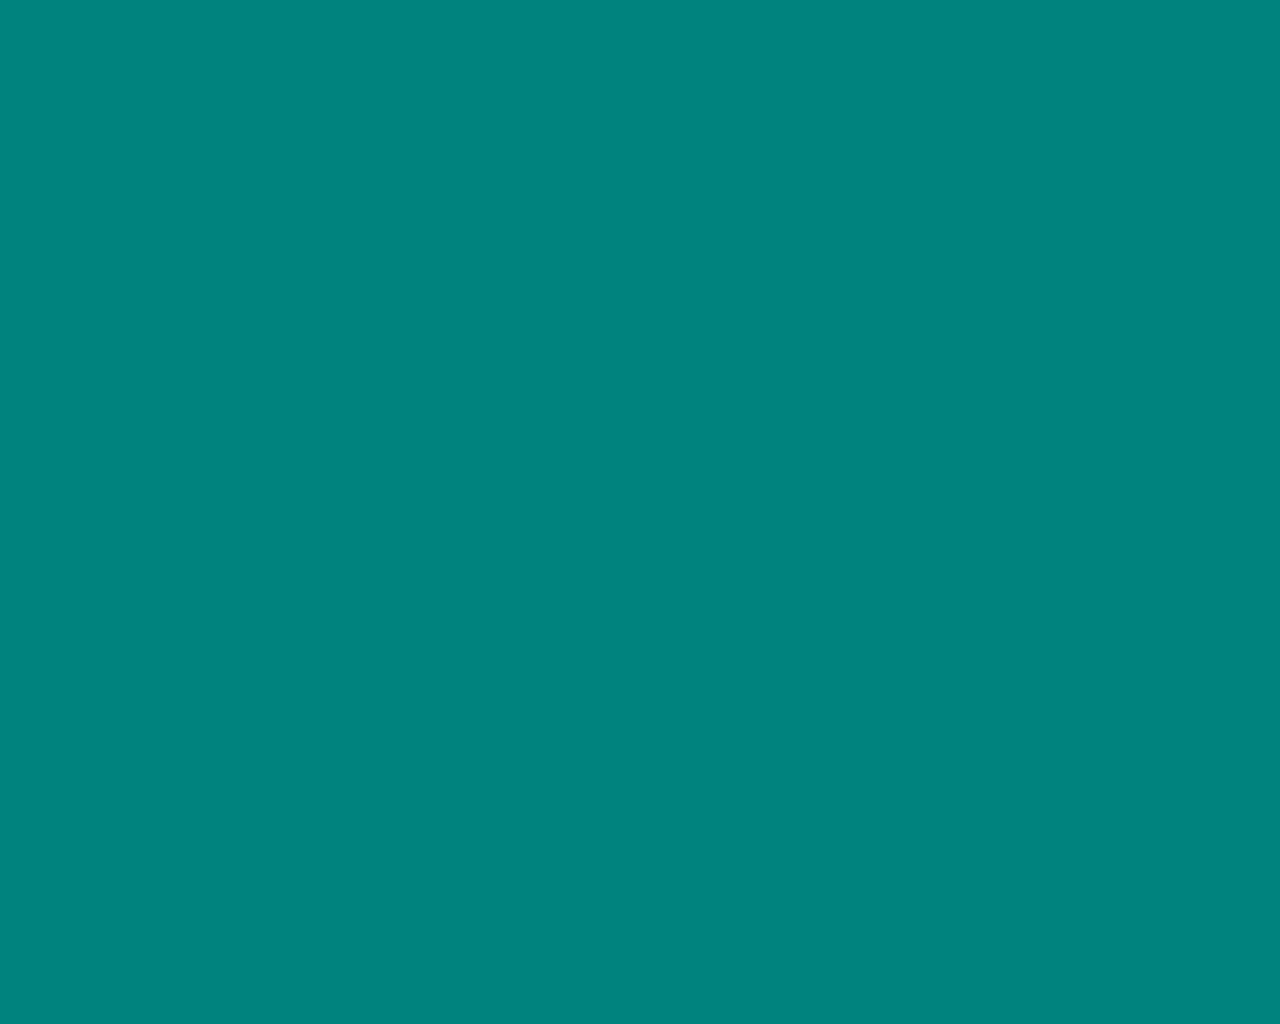 1280x1024 Teal Green Solid Color Background